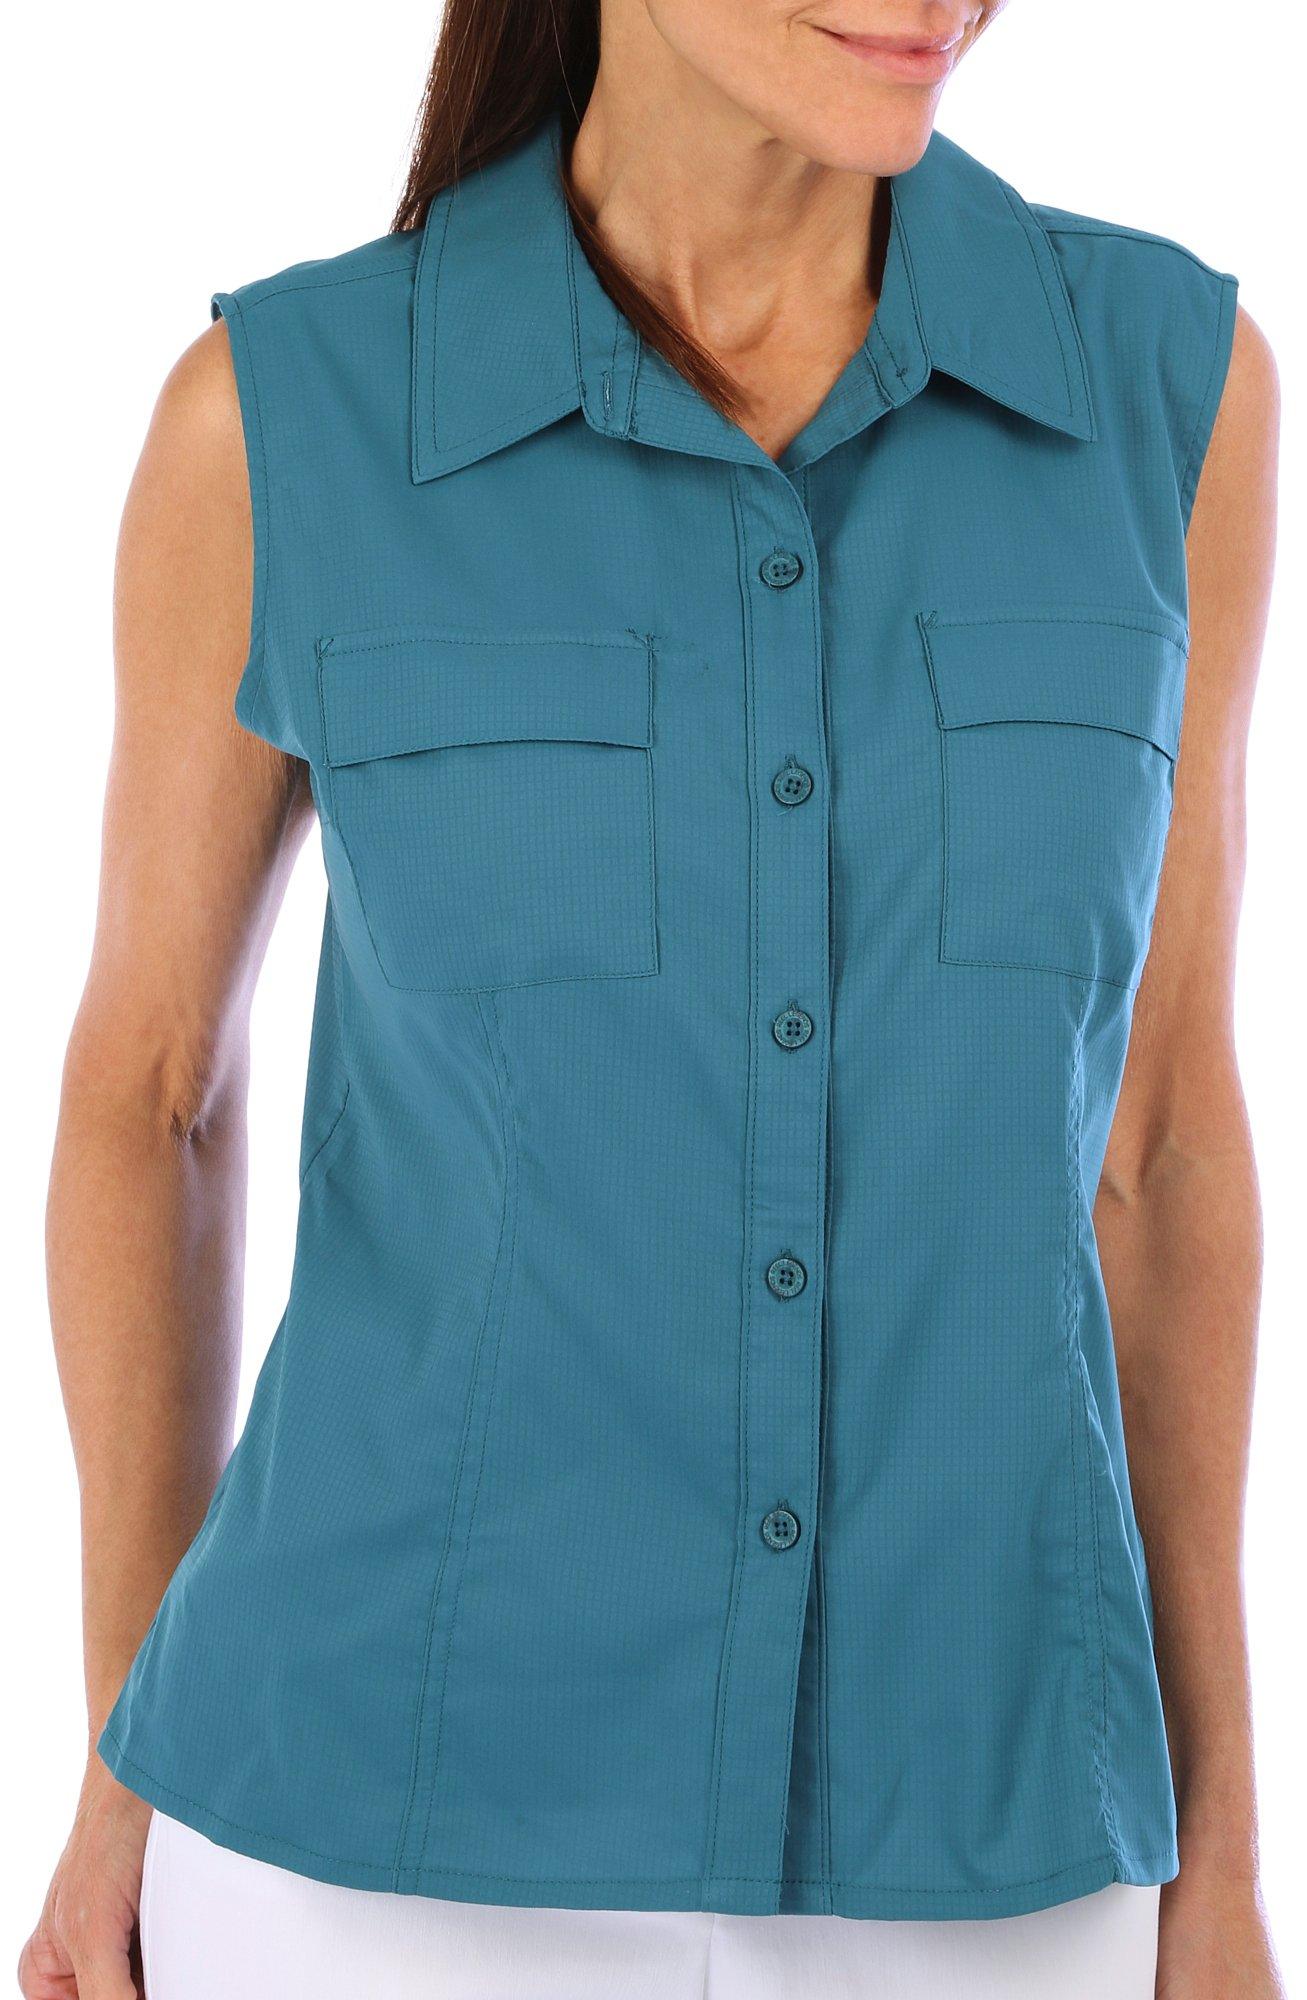 Reel Legends Womens Solid Mariner Sleeveless Top - Green - Large